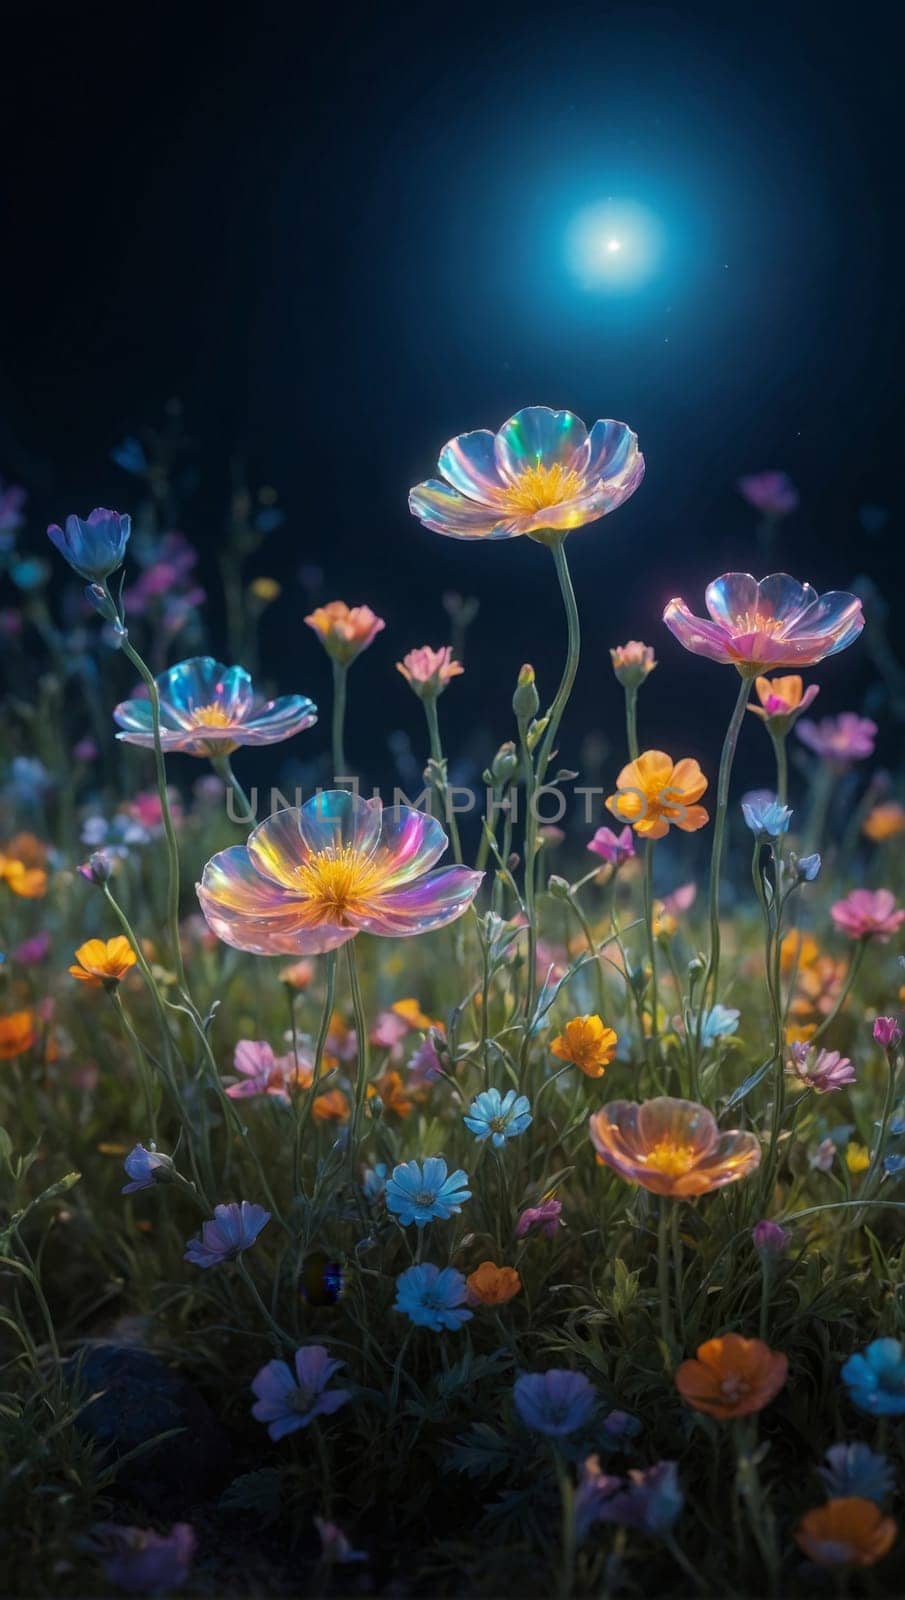 Magical night flowers by applesstock